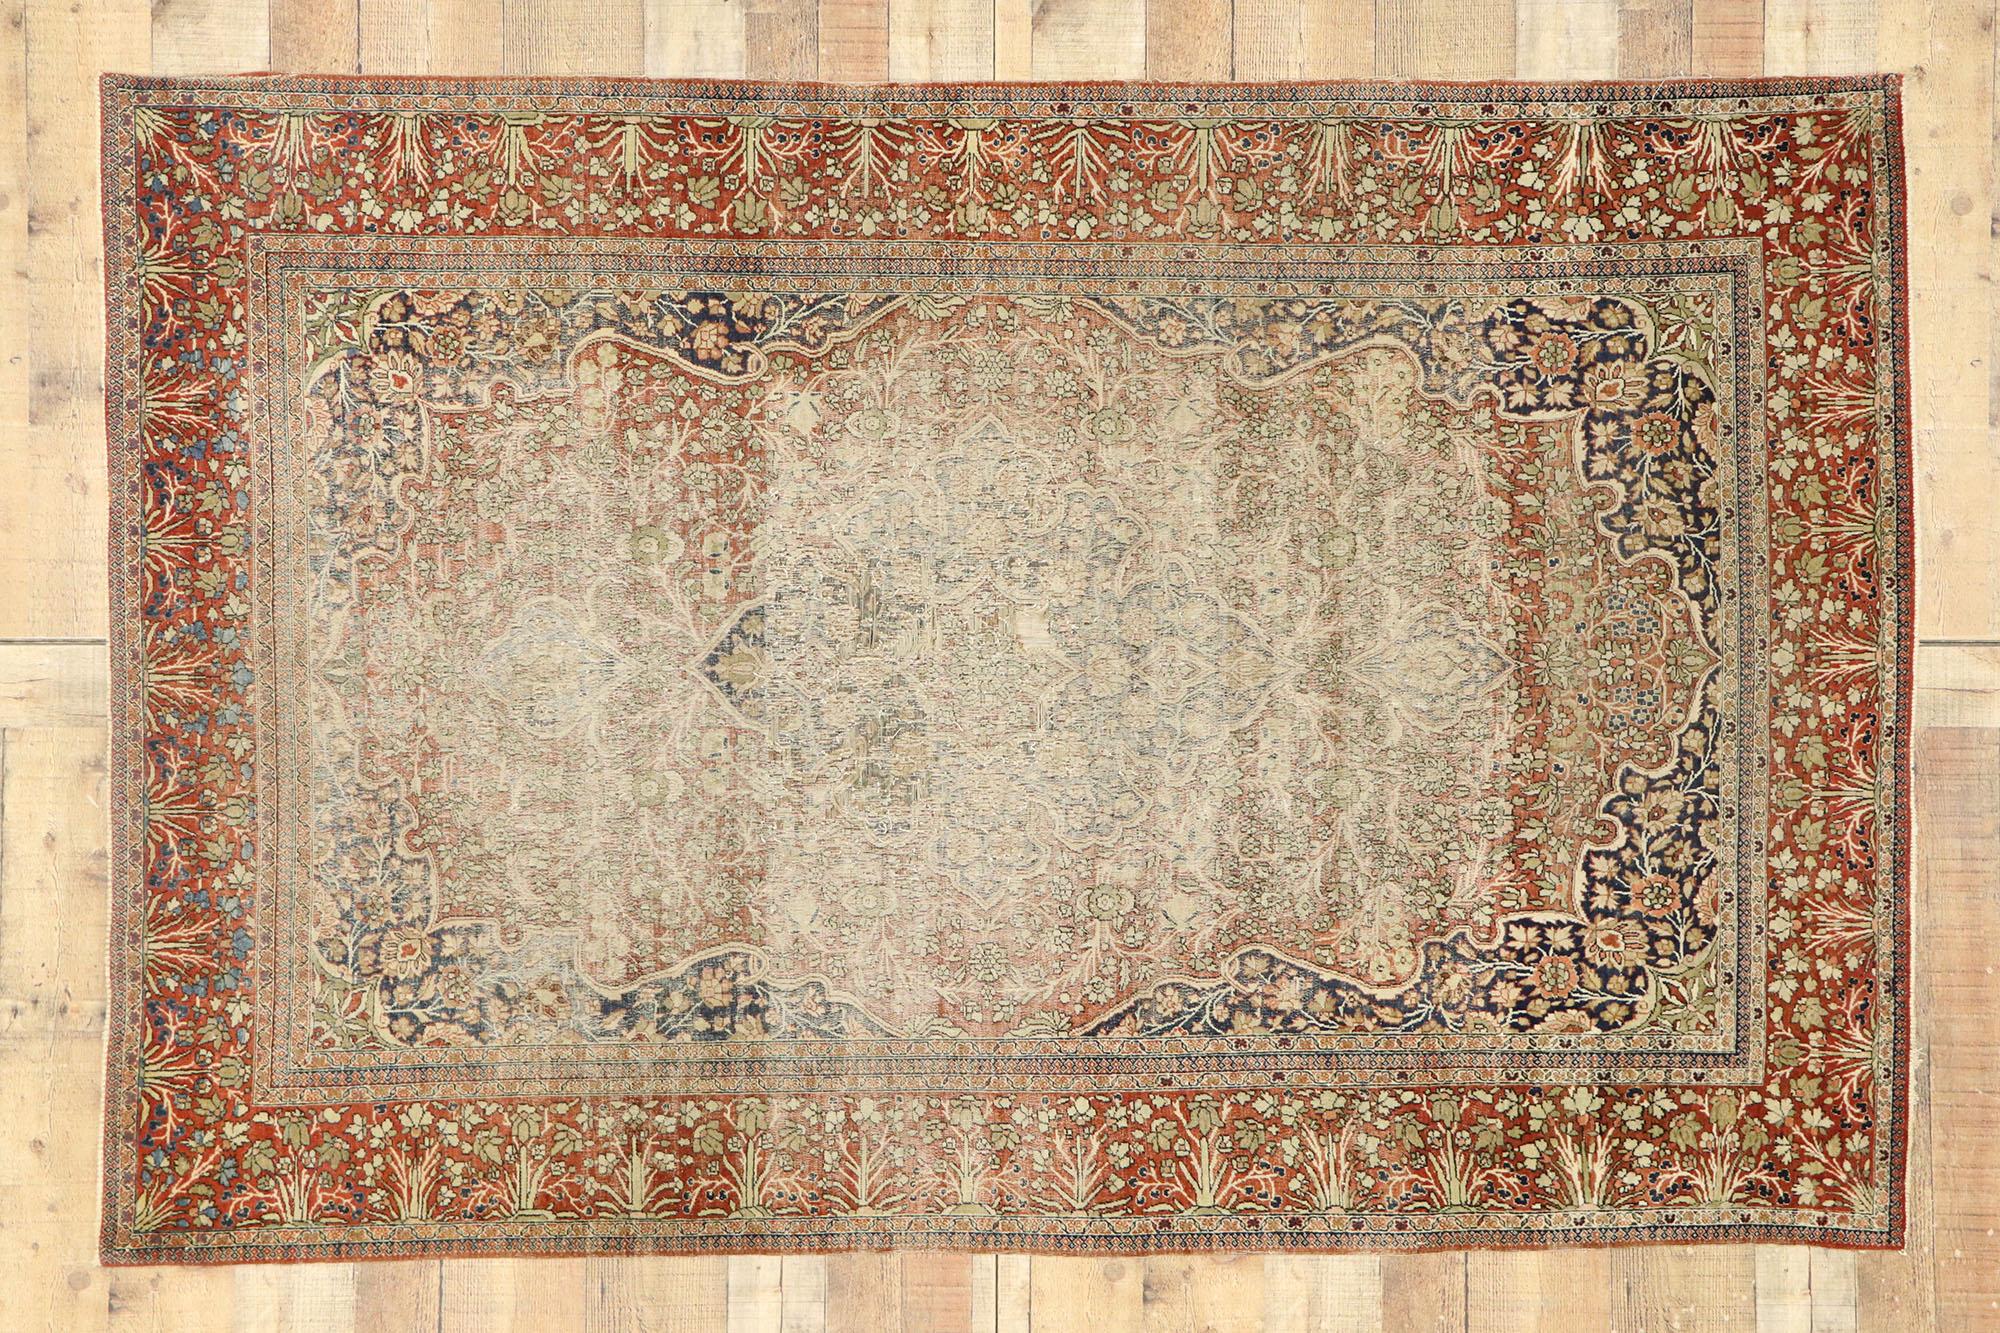 Distressed Antique Persian Mohtesham Kashan Rug with Modern Rustic English Style For Sale 2